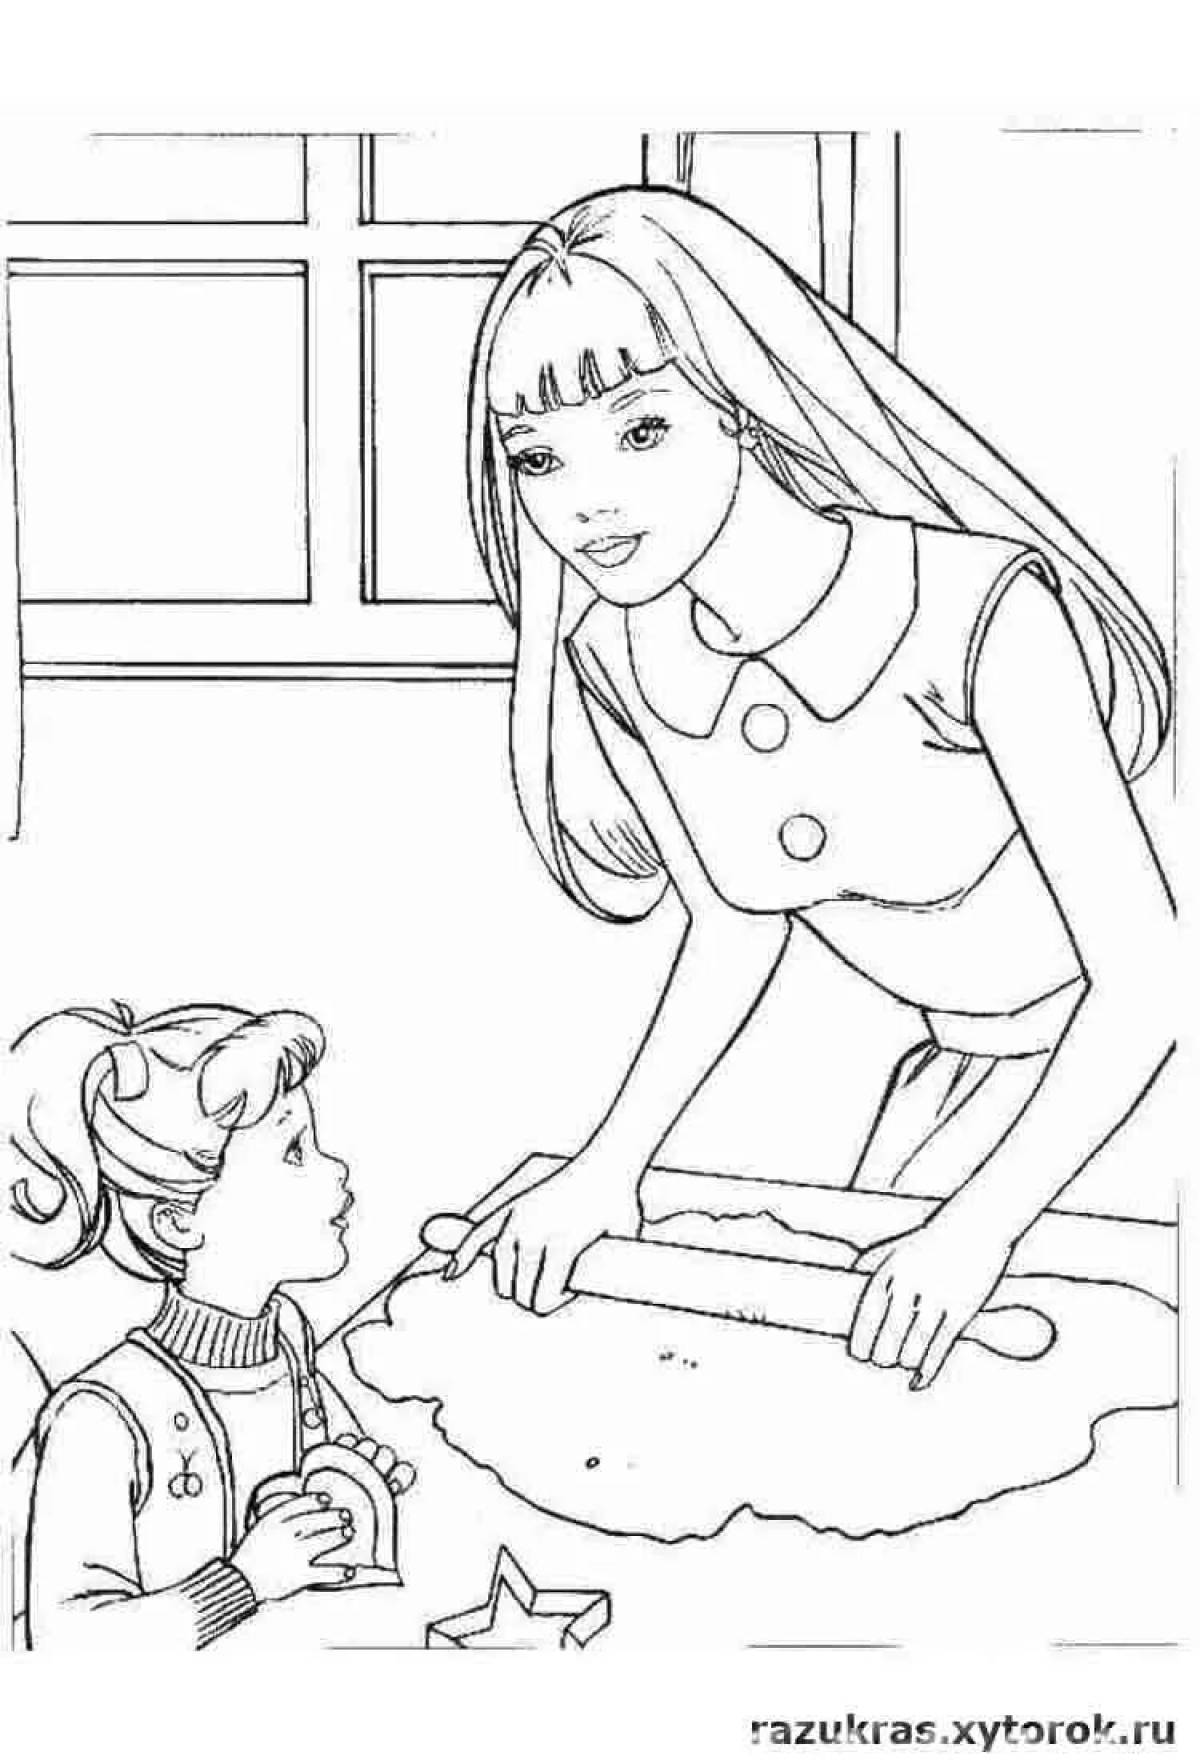 Coloring book shiny daughter